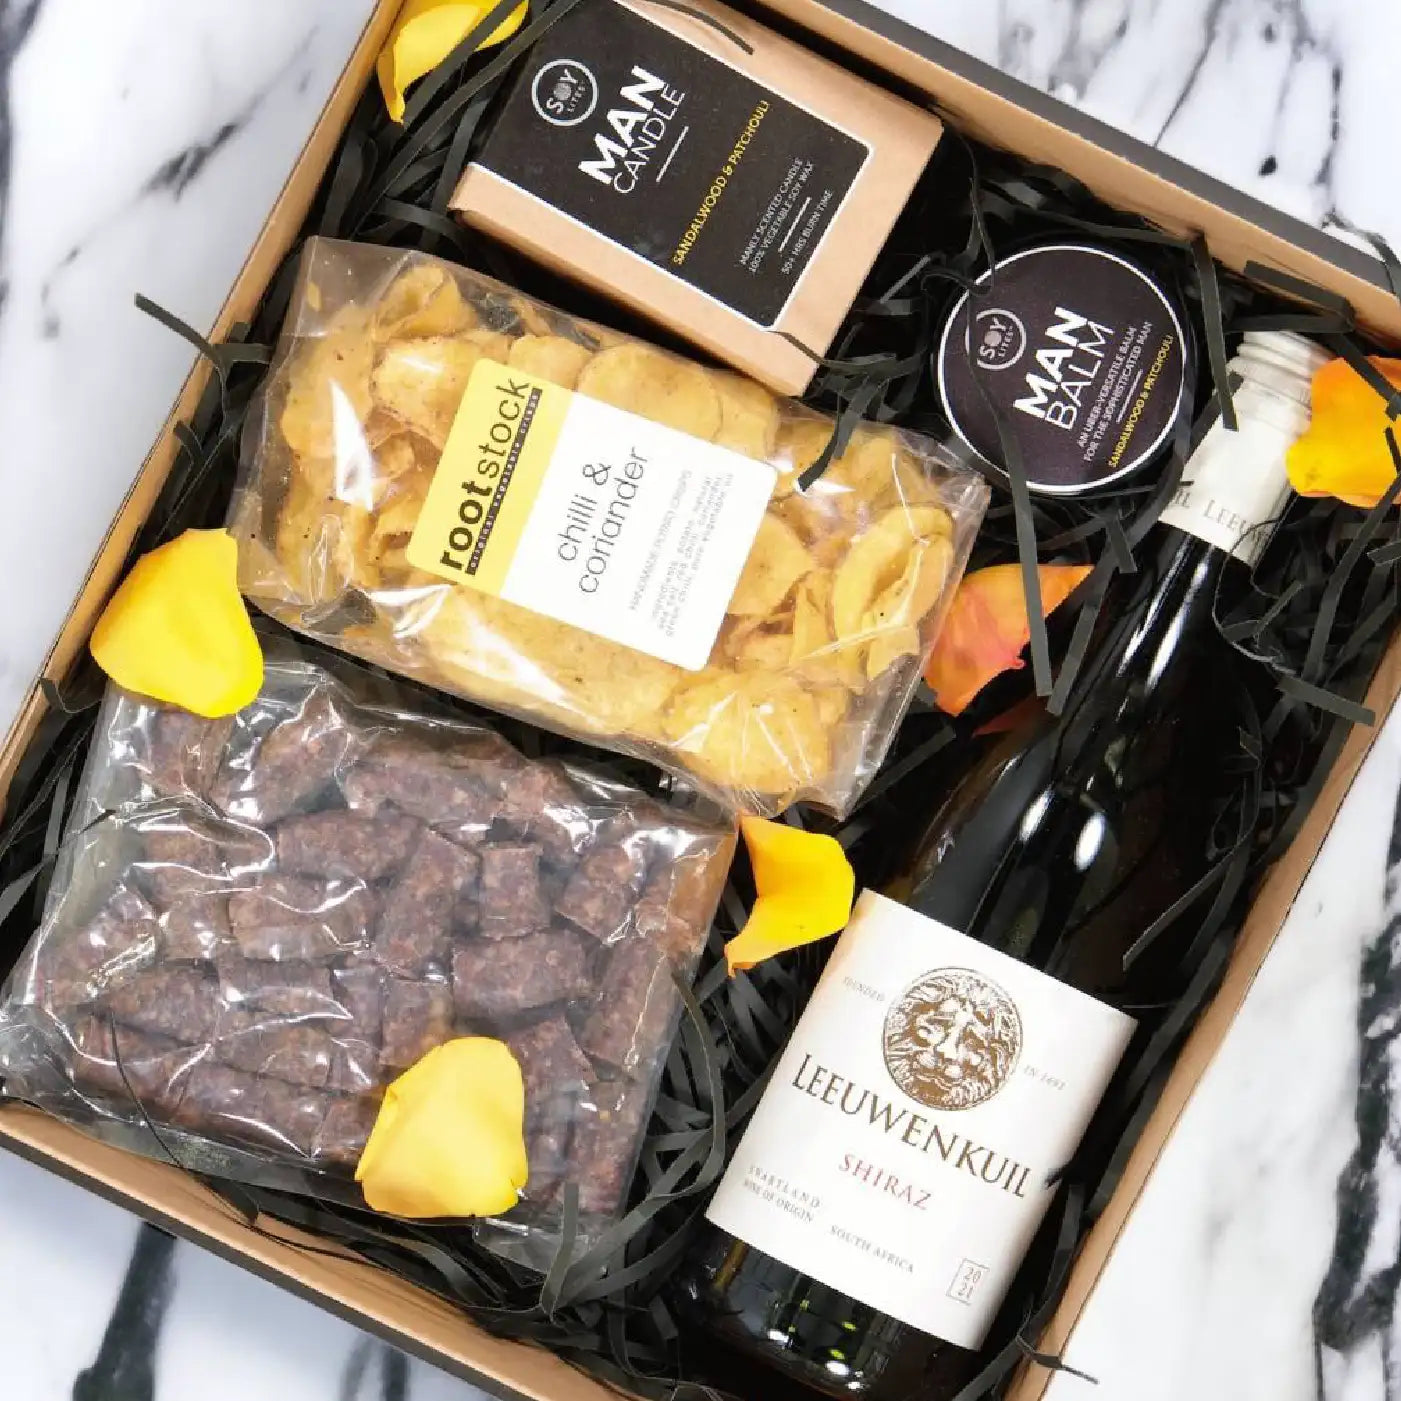 A luxurious gift box featuring a bottle of Leeuwenkuil Shiraz wine, chilli and coriander crisps, man balm, man candle, and a packet of gourmet nuts, arranged with yellow rose petals. Business Gifting. Fabulous Flowers and Gifts.